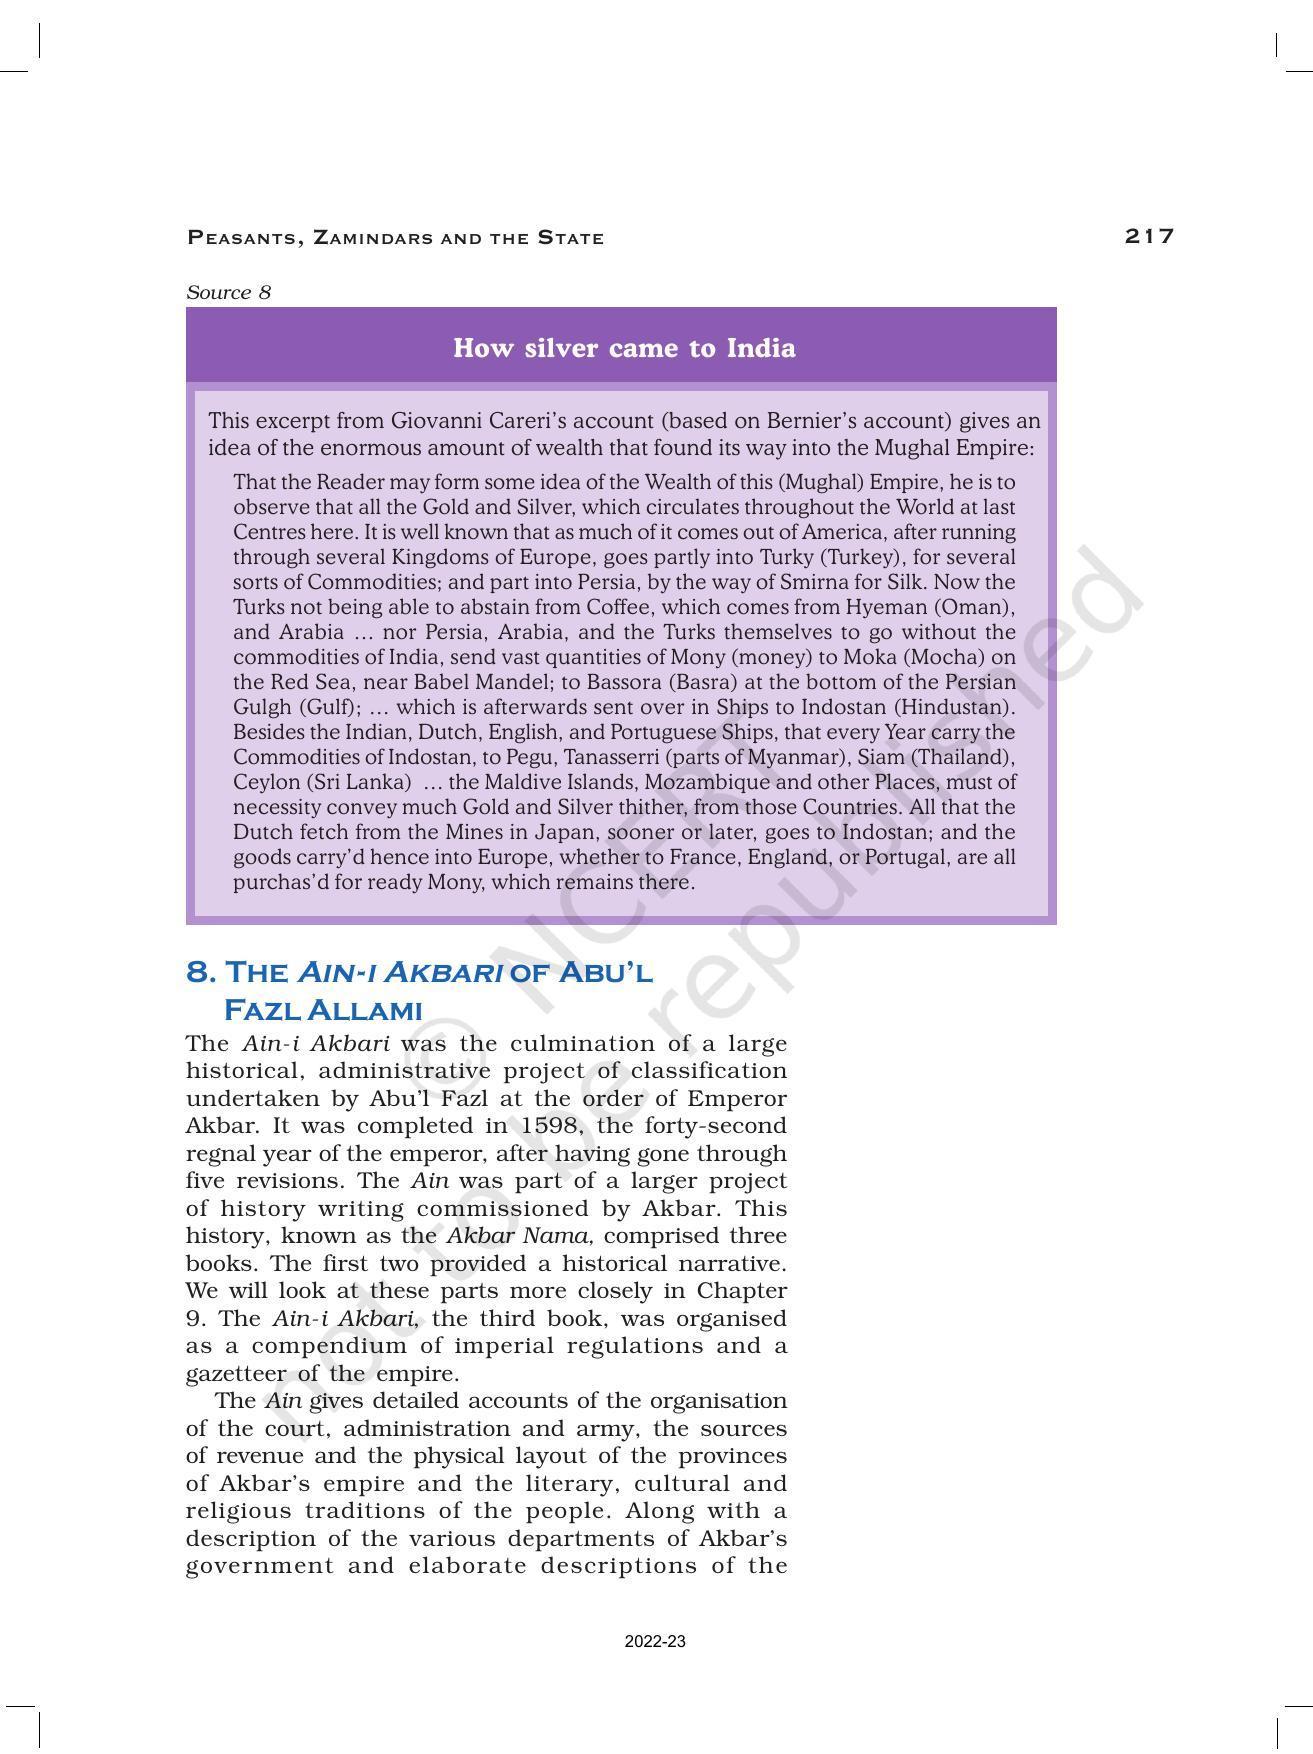 NCERT Book for Class 12 History (Part-II) Chapter 8 Peasants, Zamindars, and the State - Page 22